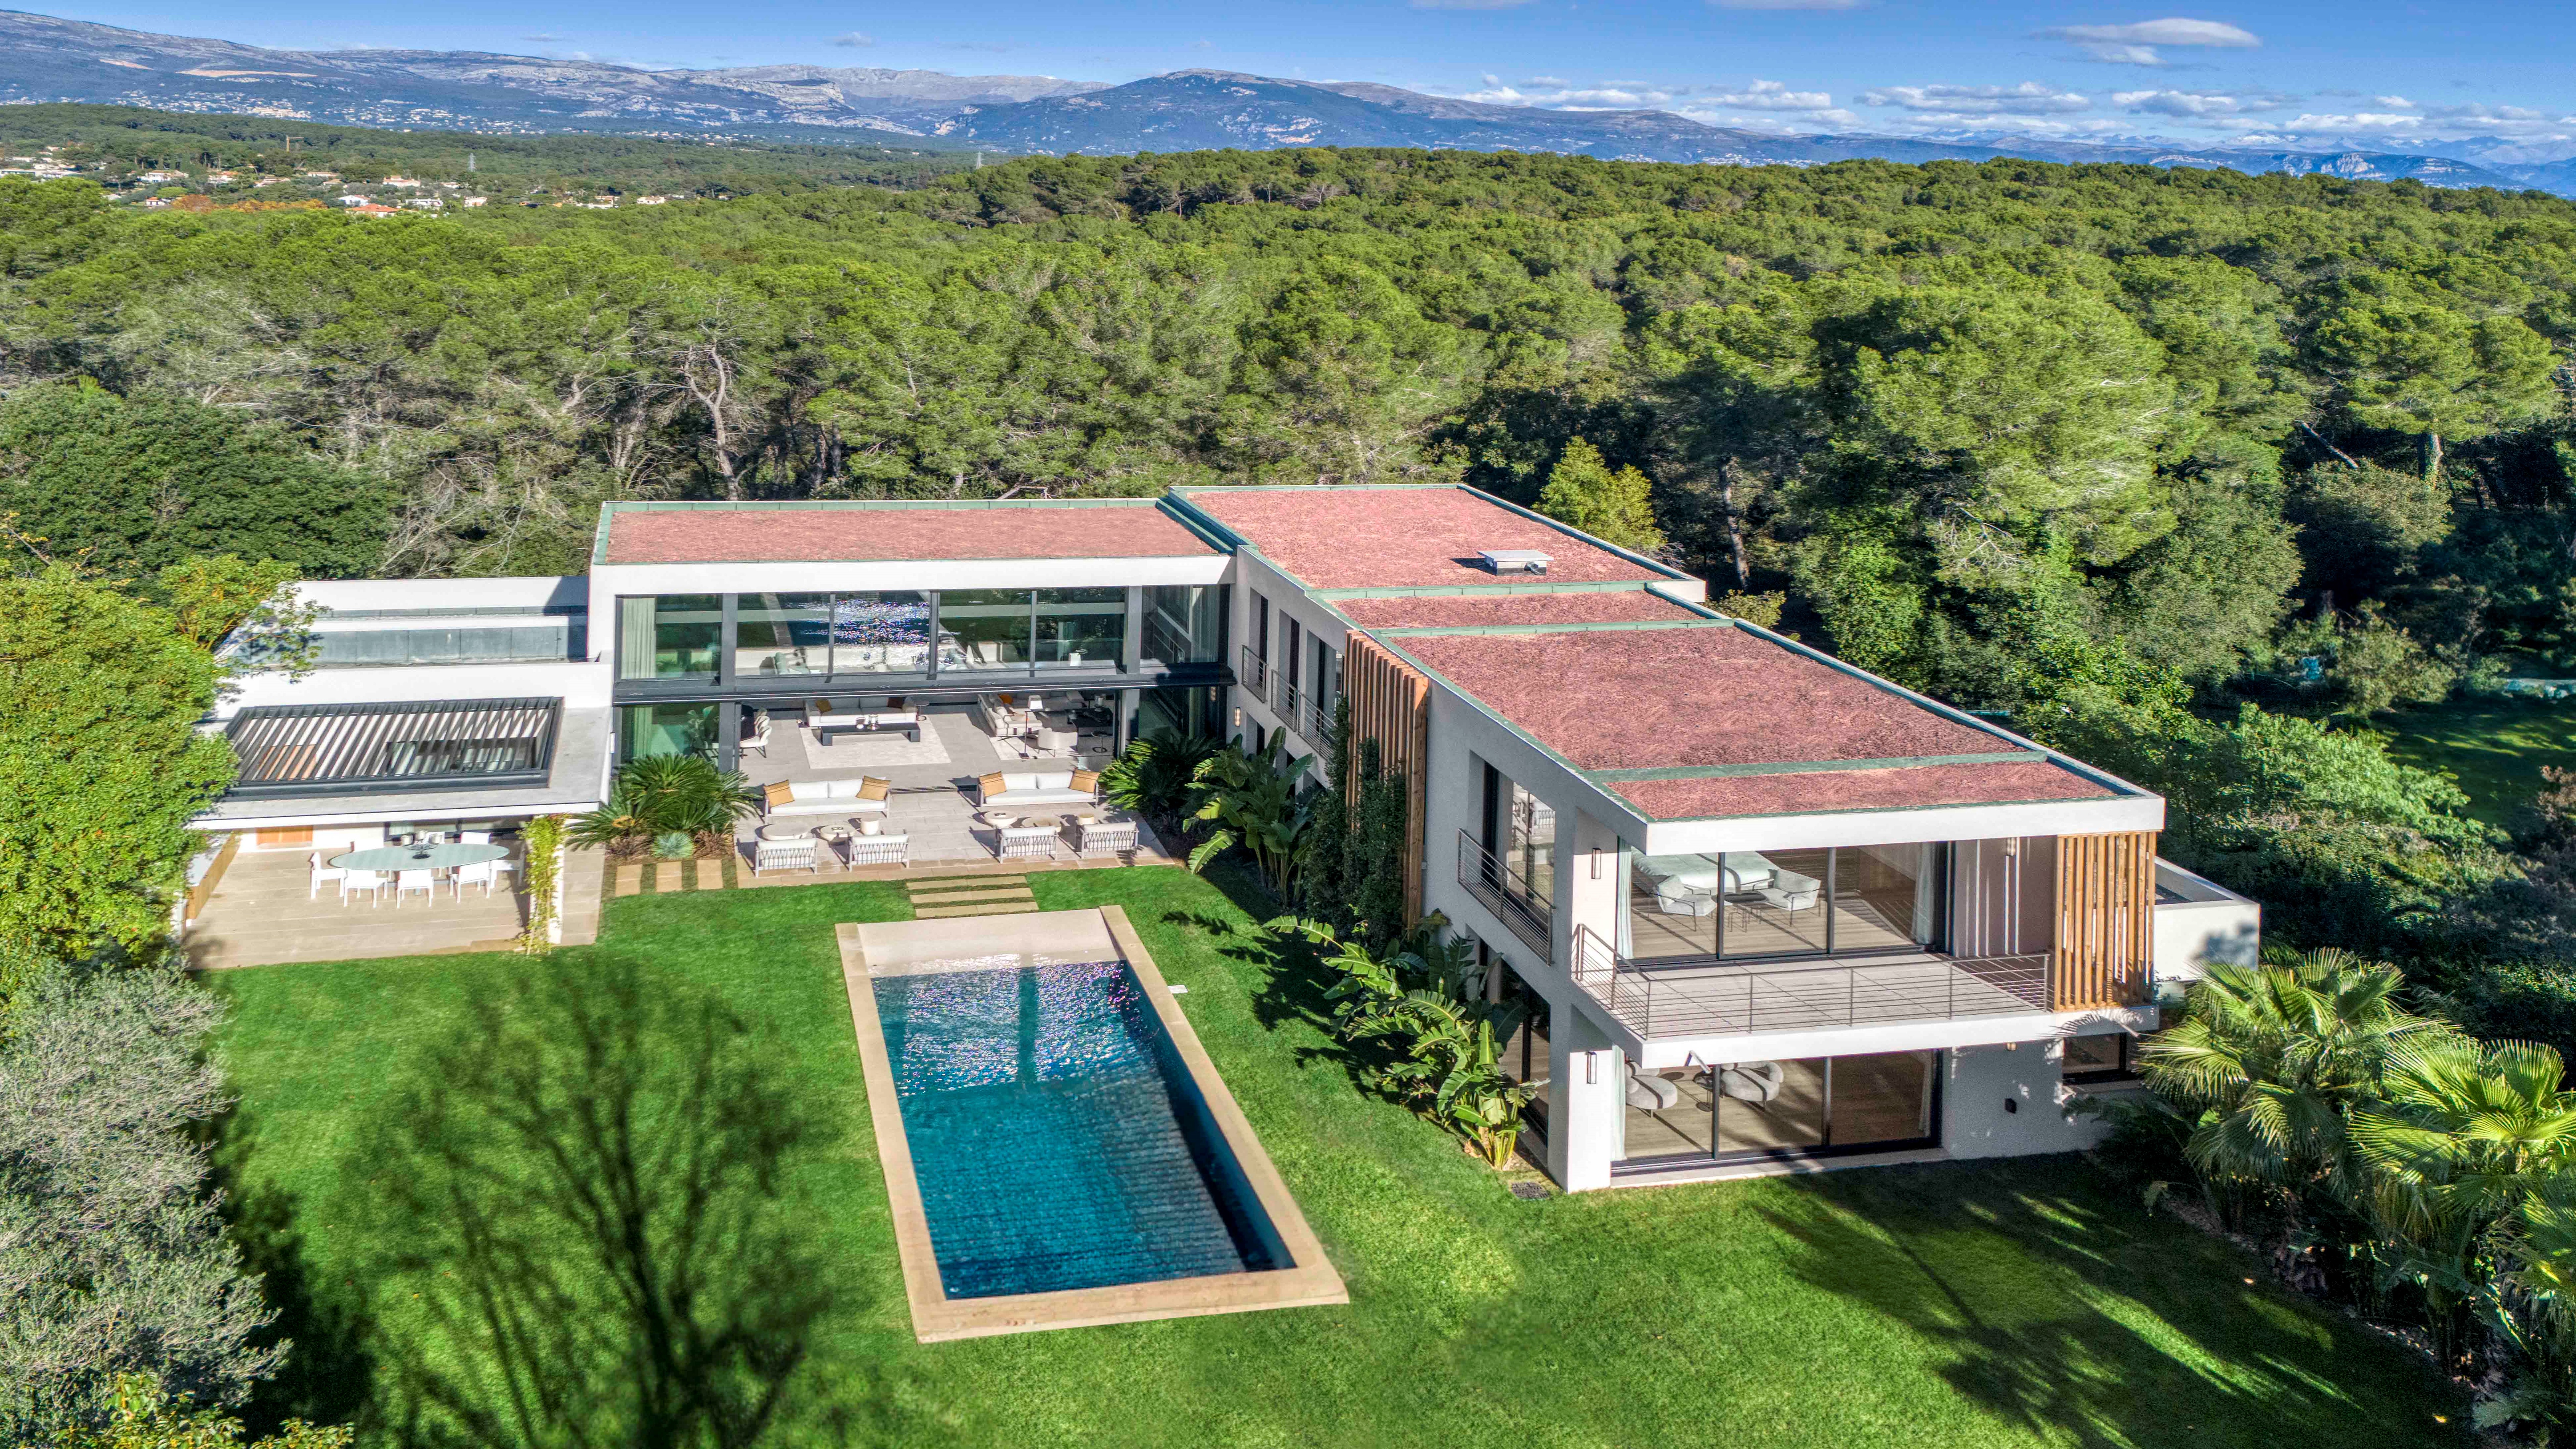 Luxury listing Cannes. Agence Europa offers you for sale this outstanding contemporary villa on the heights of Cannes - French Riviera